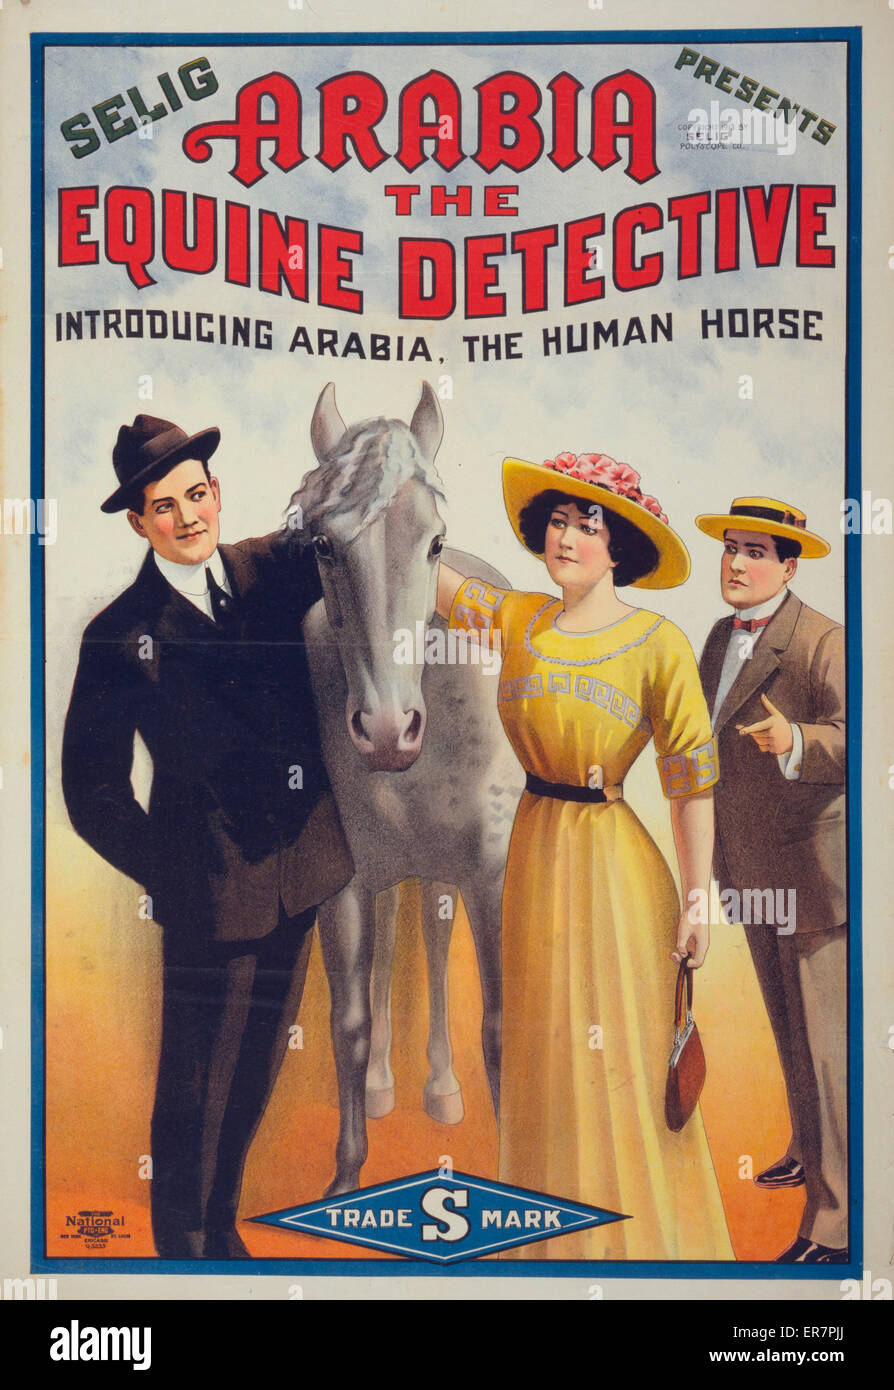 Arabia the equine detective. Motion picture poster for Arabia the Equine Detective shows two men and woman standing next to a horse. Date c1913. Arabia the equine detective. Motion picture poster for Arabia the Equine Detective shows two men and woman sta Stock Photo